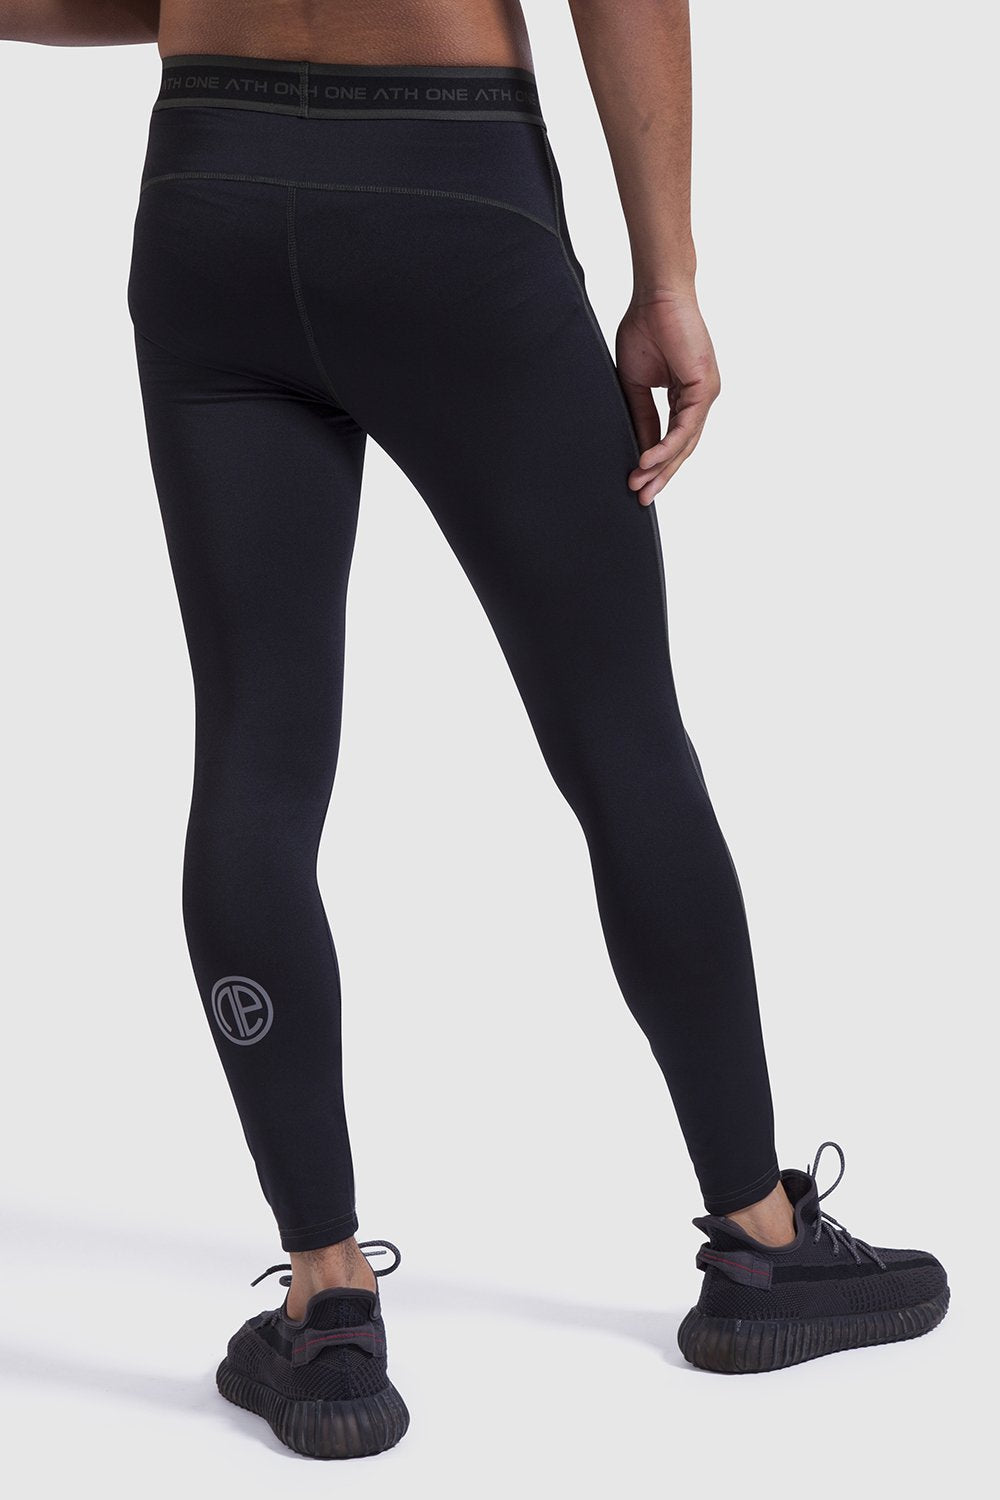 Quick Dry Compression Running Mens Running Tights For Men 3/4 Size Fitness Sports  Leggings For Gym And Running From Teahong, $12.9 | DHgate.Com